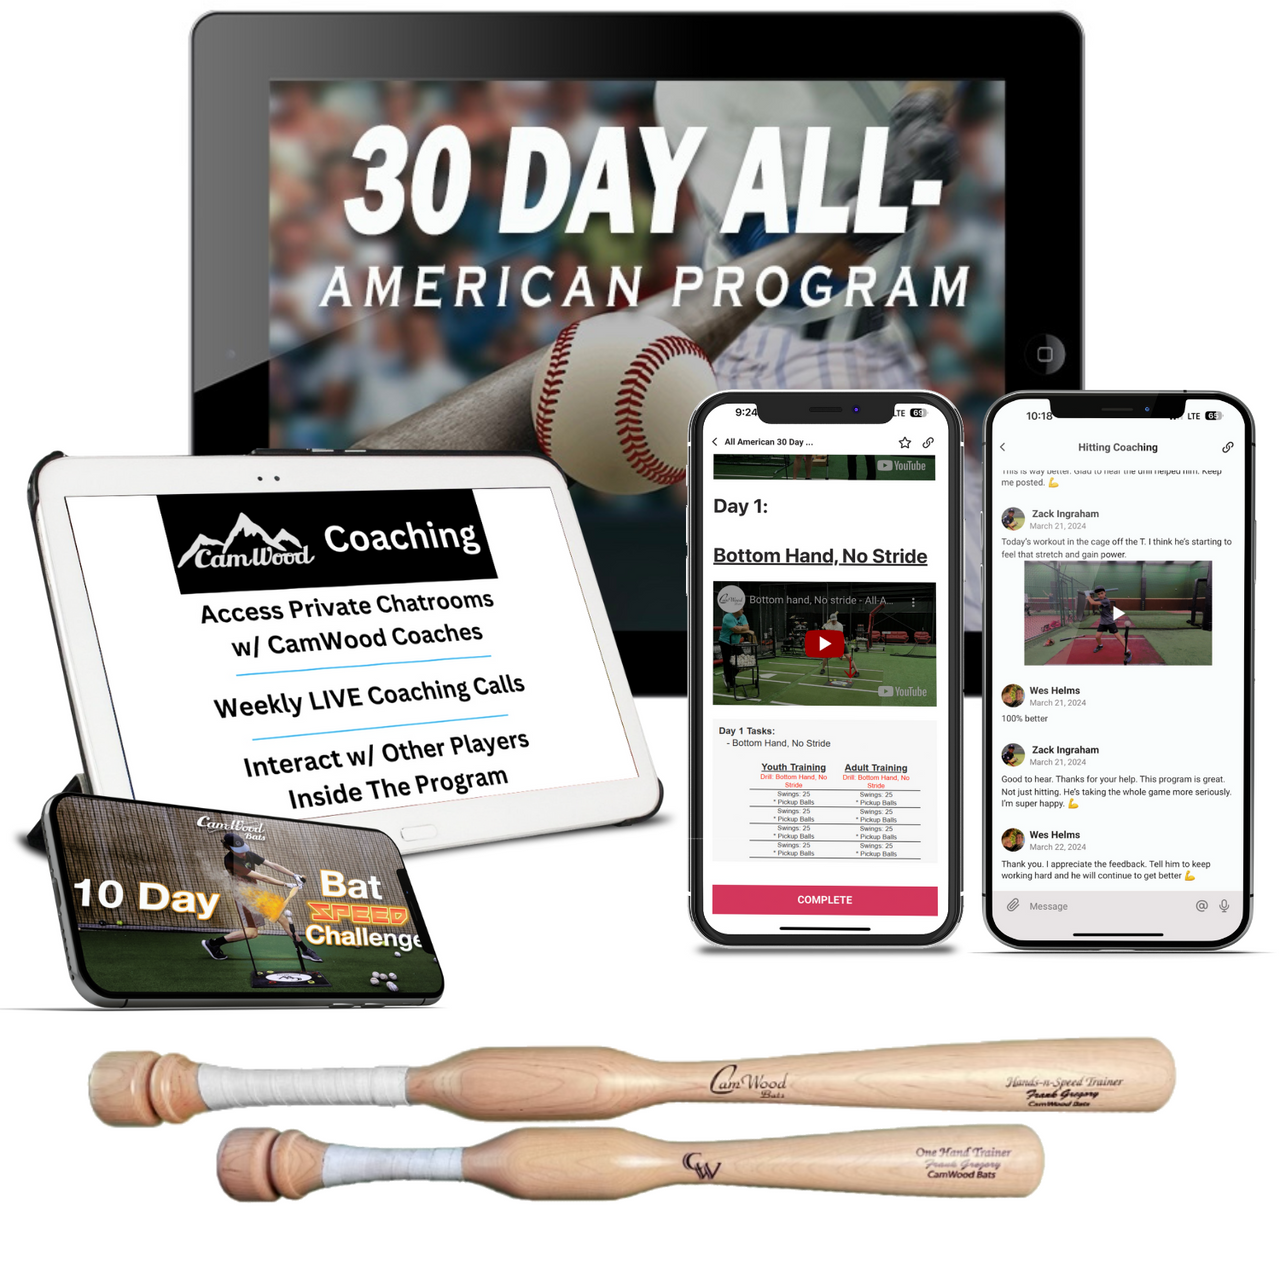 All-American 30 Day Package